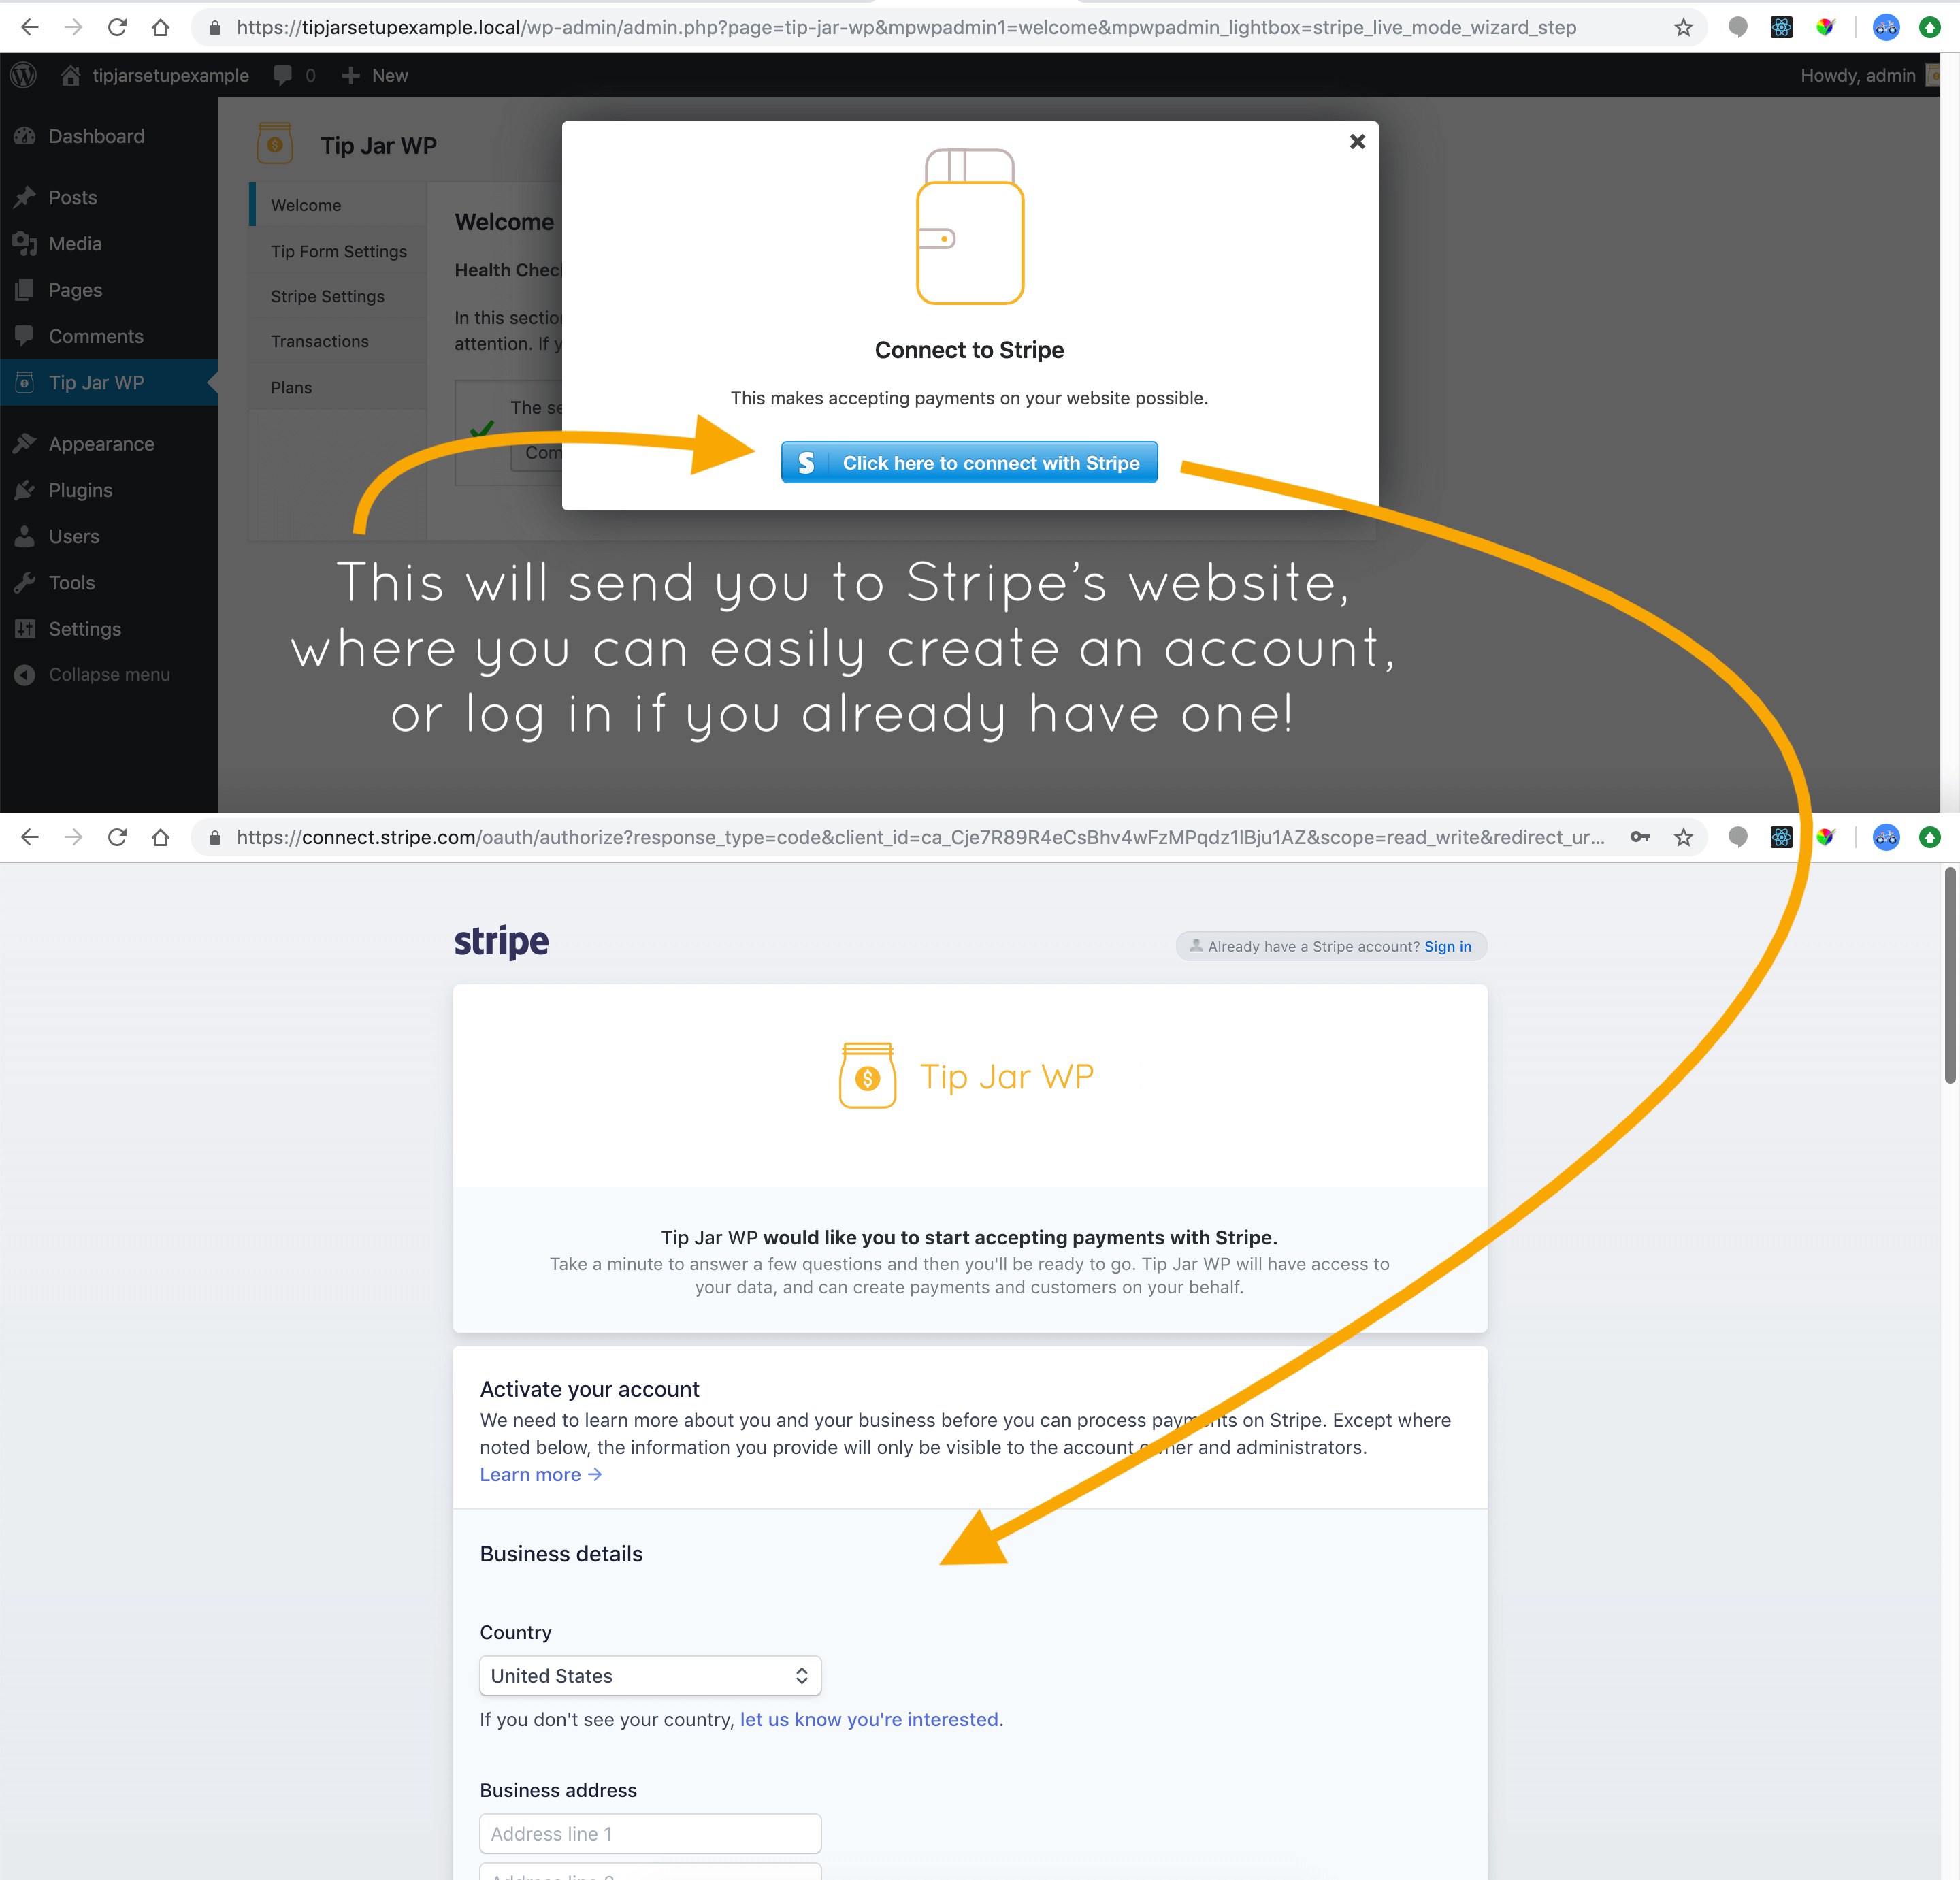 Now you will be prompted to connect (or create) your Stripe Account. Click the blue button, and Stripe's website will load.